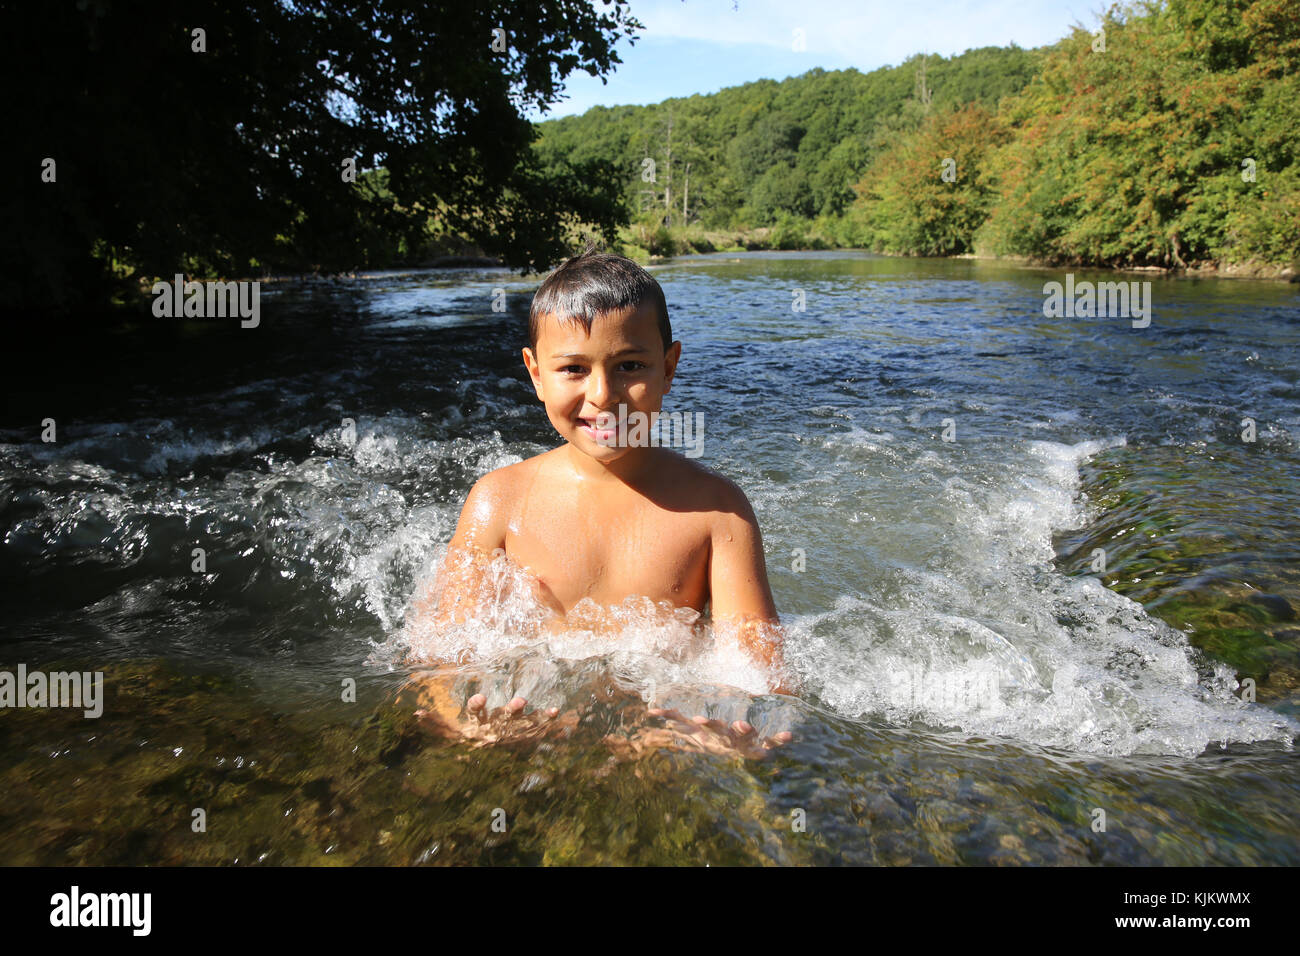 Boy bathing in a river. France. Stock Photo